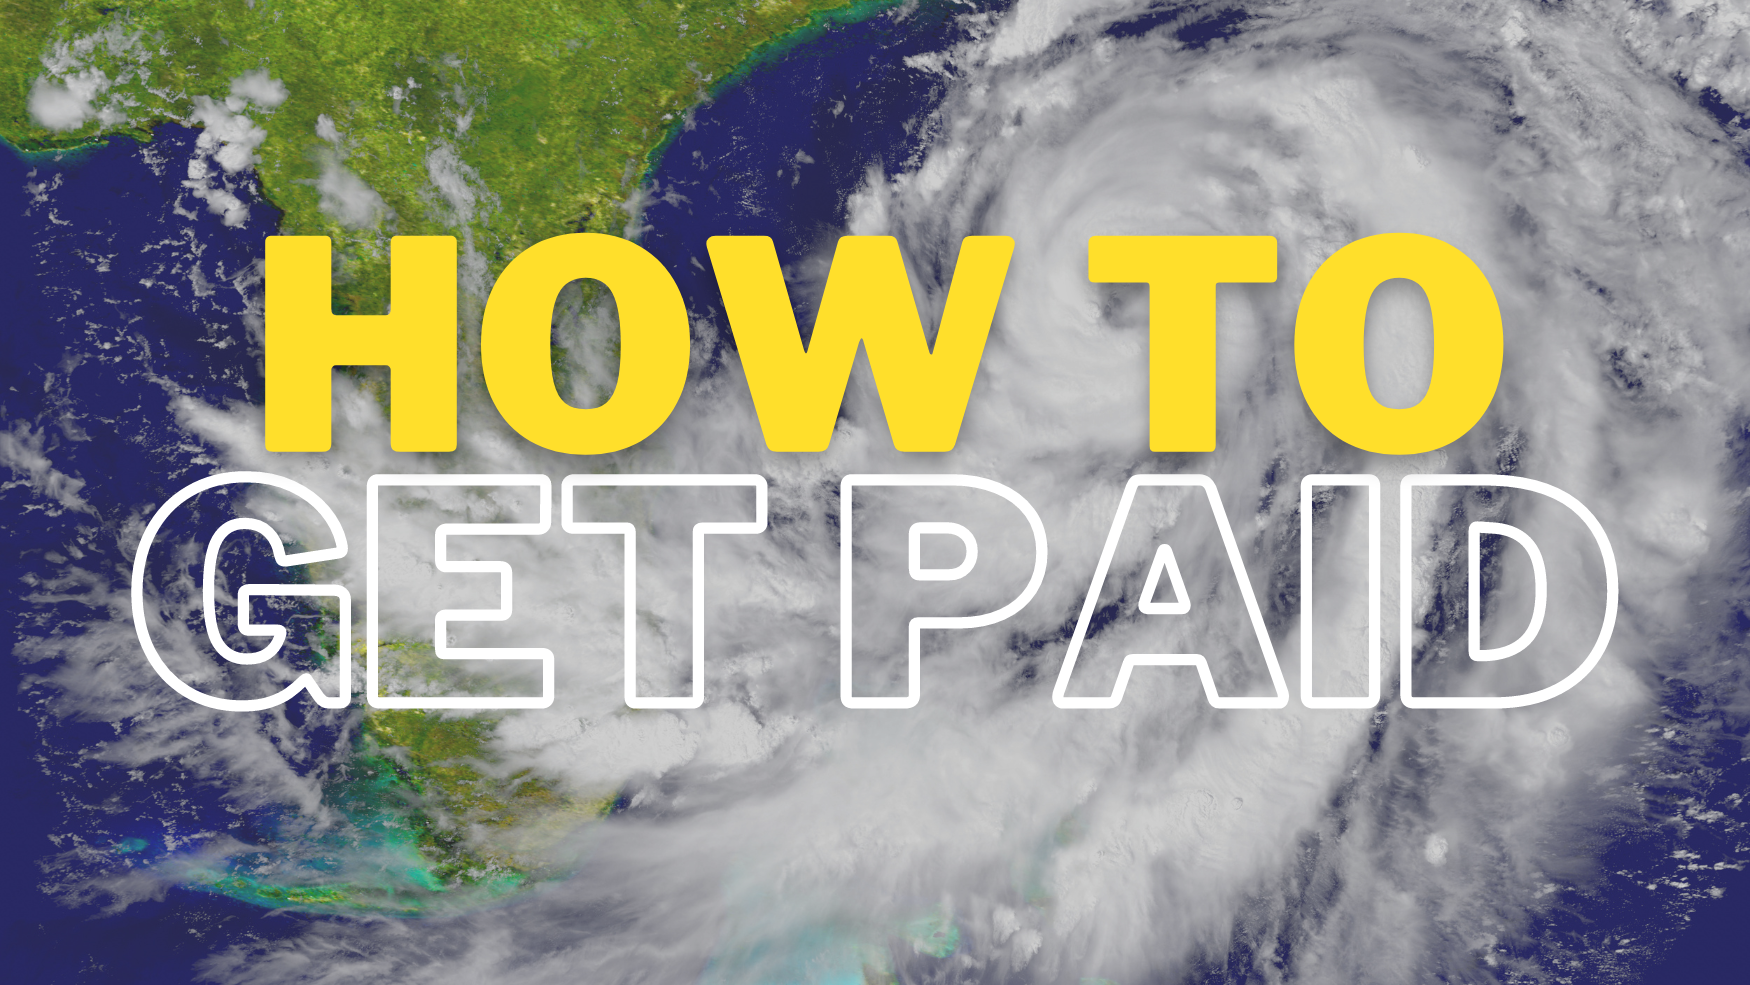 How to get your Home Insurance to Pay for your Hurricane Damage with Caliber Public Adjusters